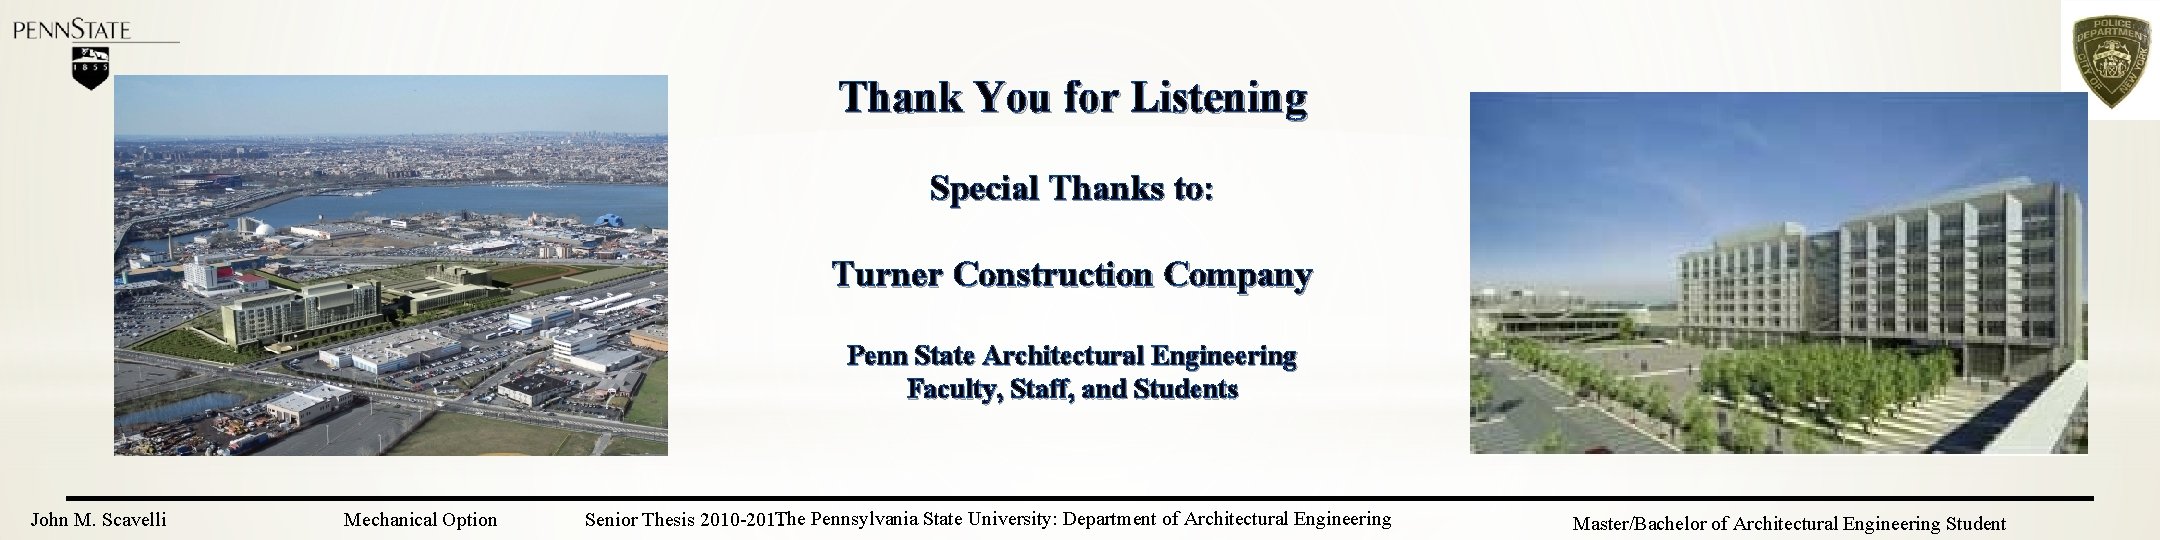 Thank You for Listening Special Thanks to: Turner Construction Company Penn State Architectural Engineering